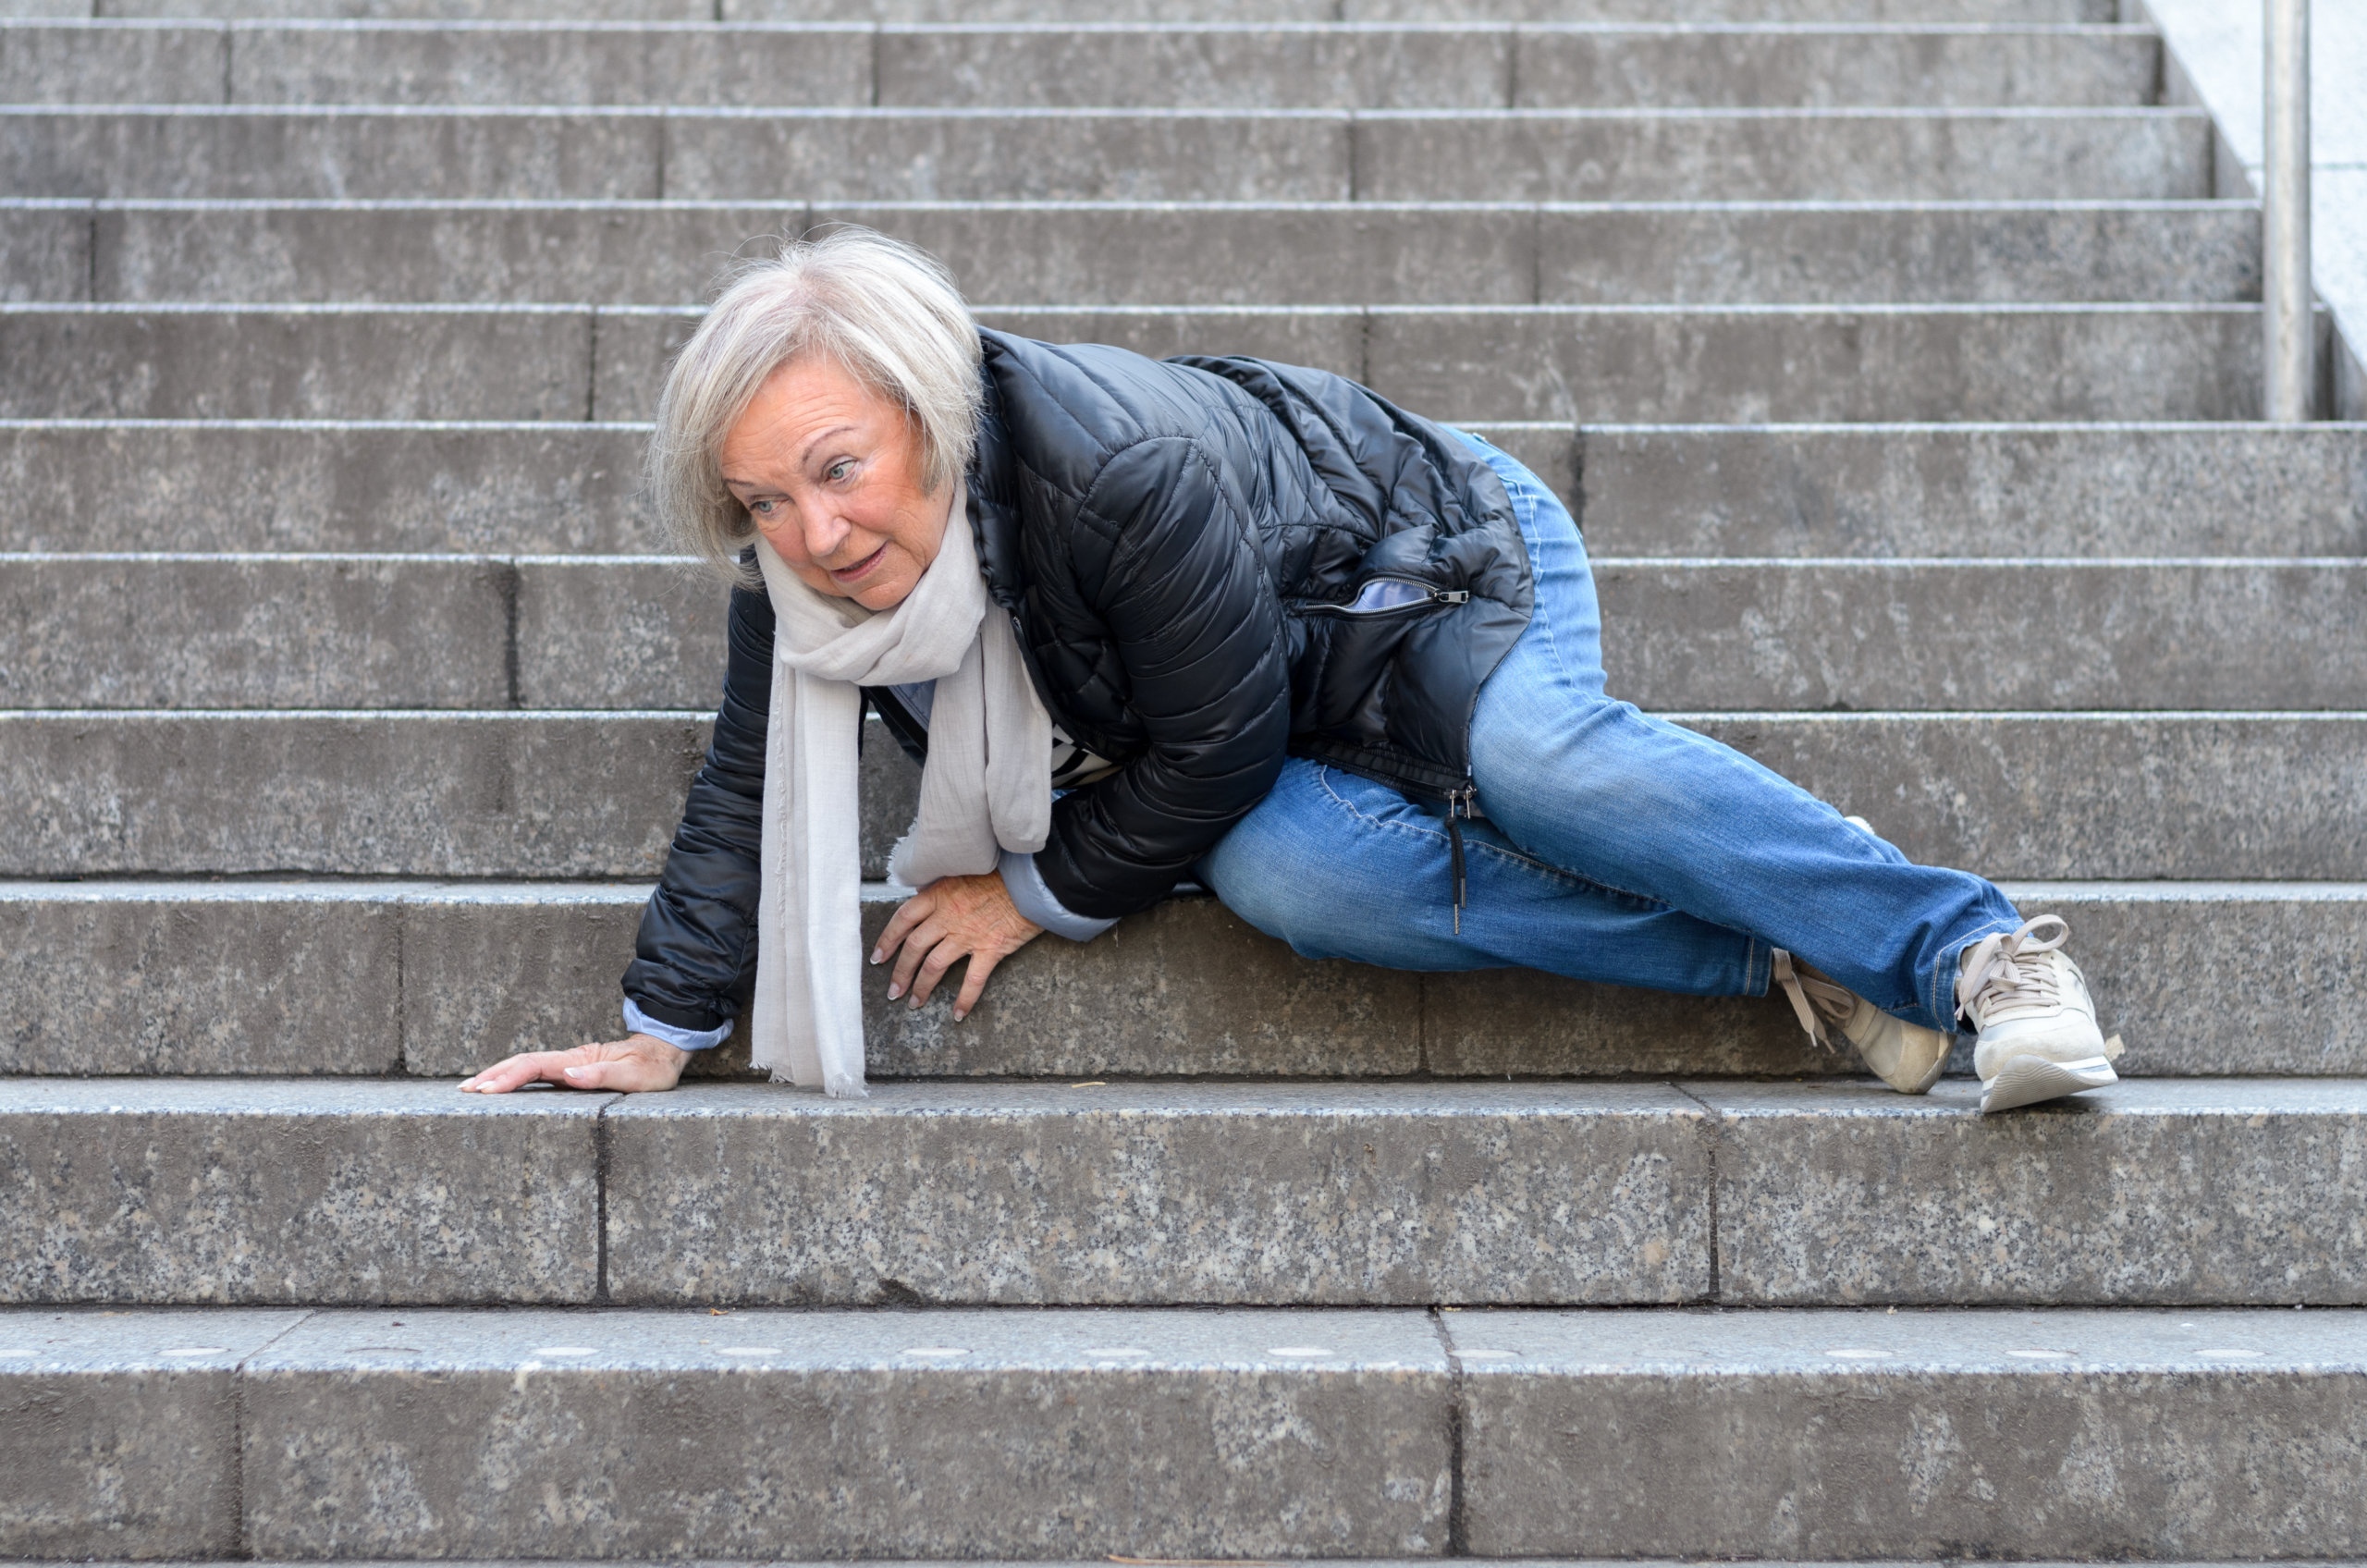 Did You Fall Down The Stairs? - Westchester Stair Accident Injury Lawyer